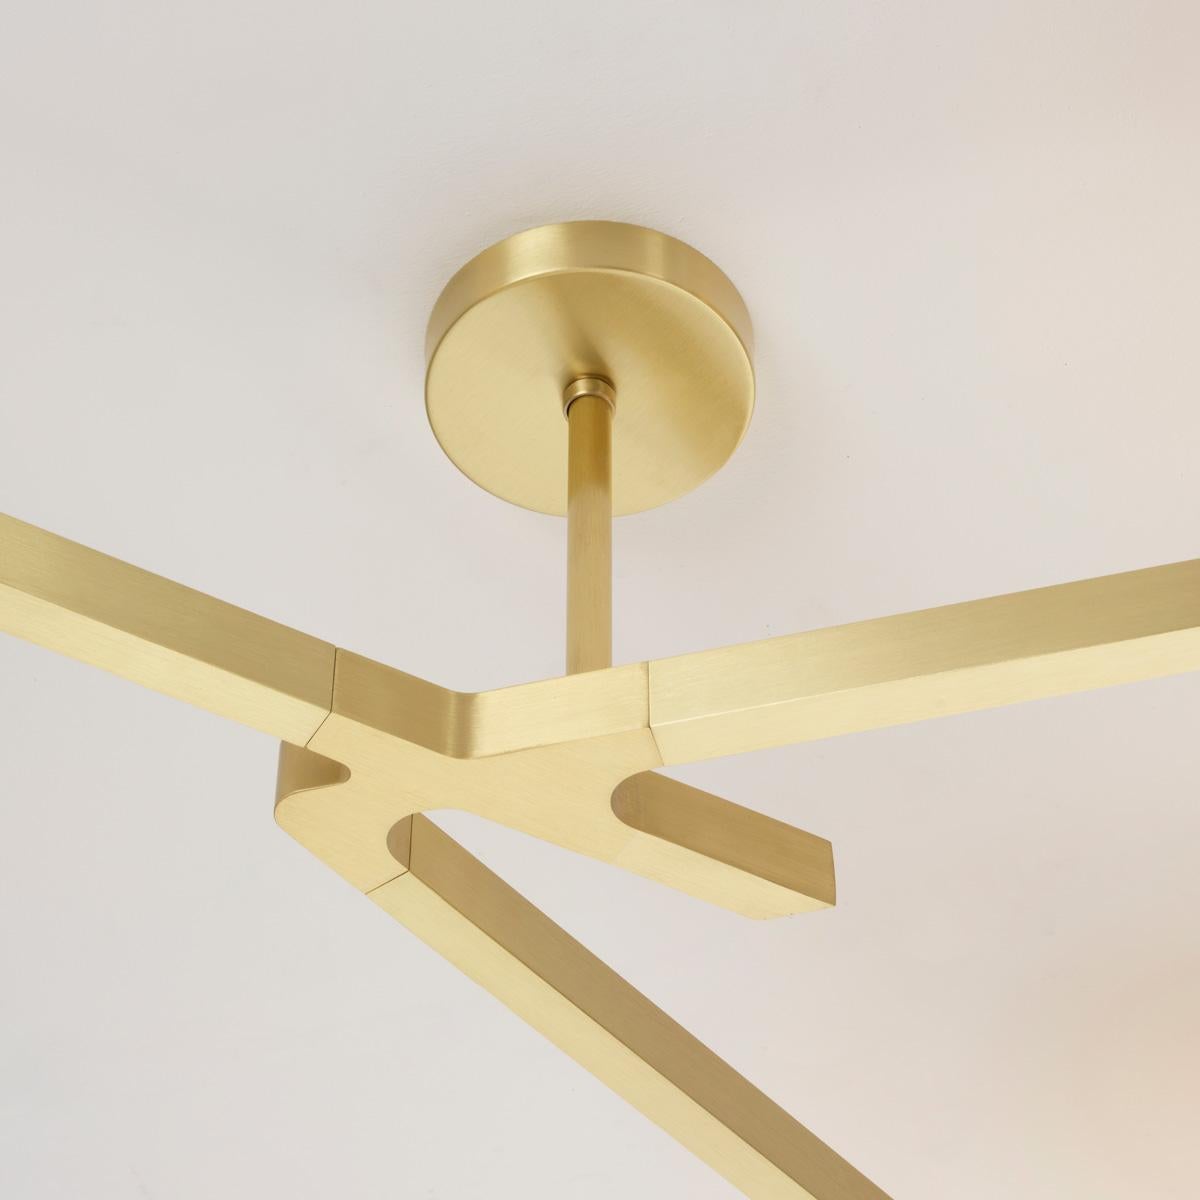 Cuore N.3 Ceiling Light by Gaspare Asaro. Peltro and Bronze Finish For Sale 6